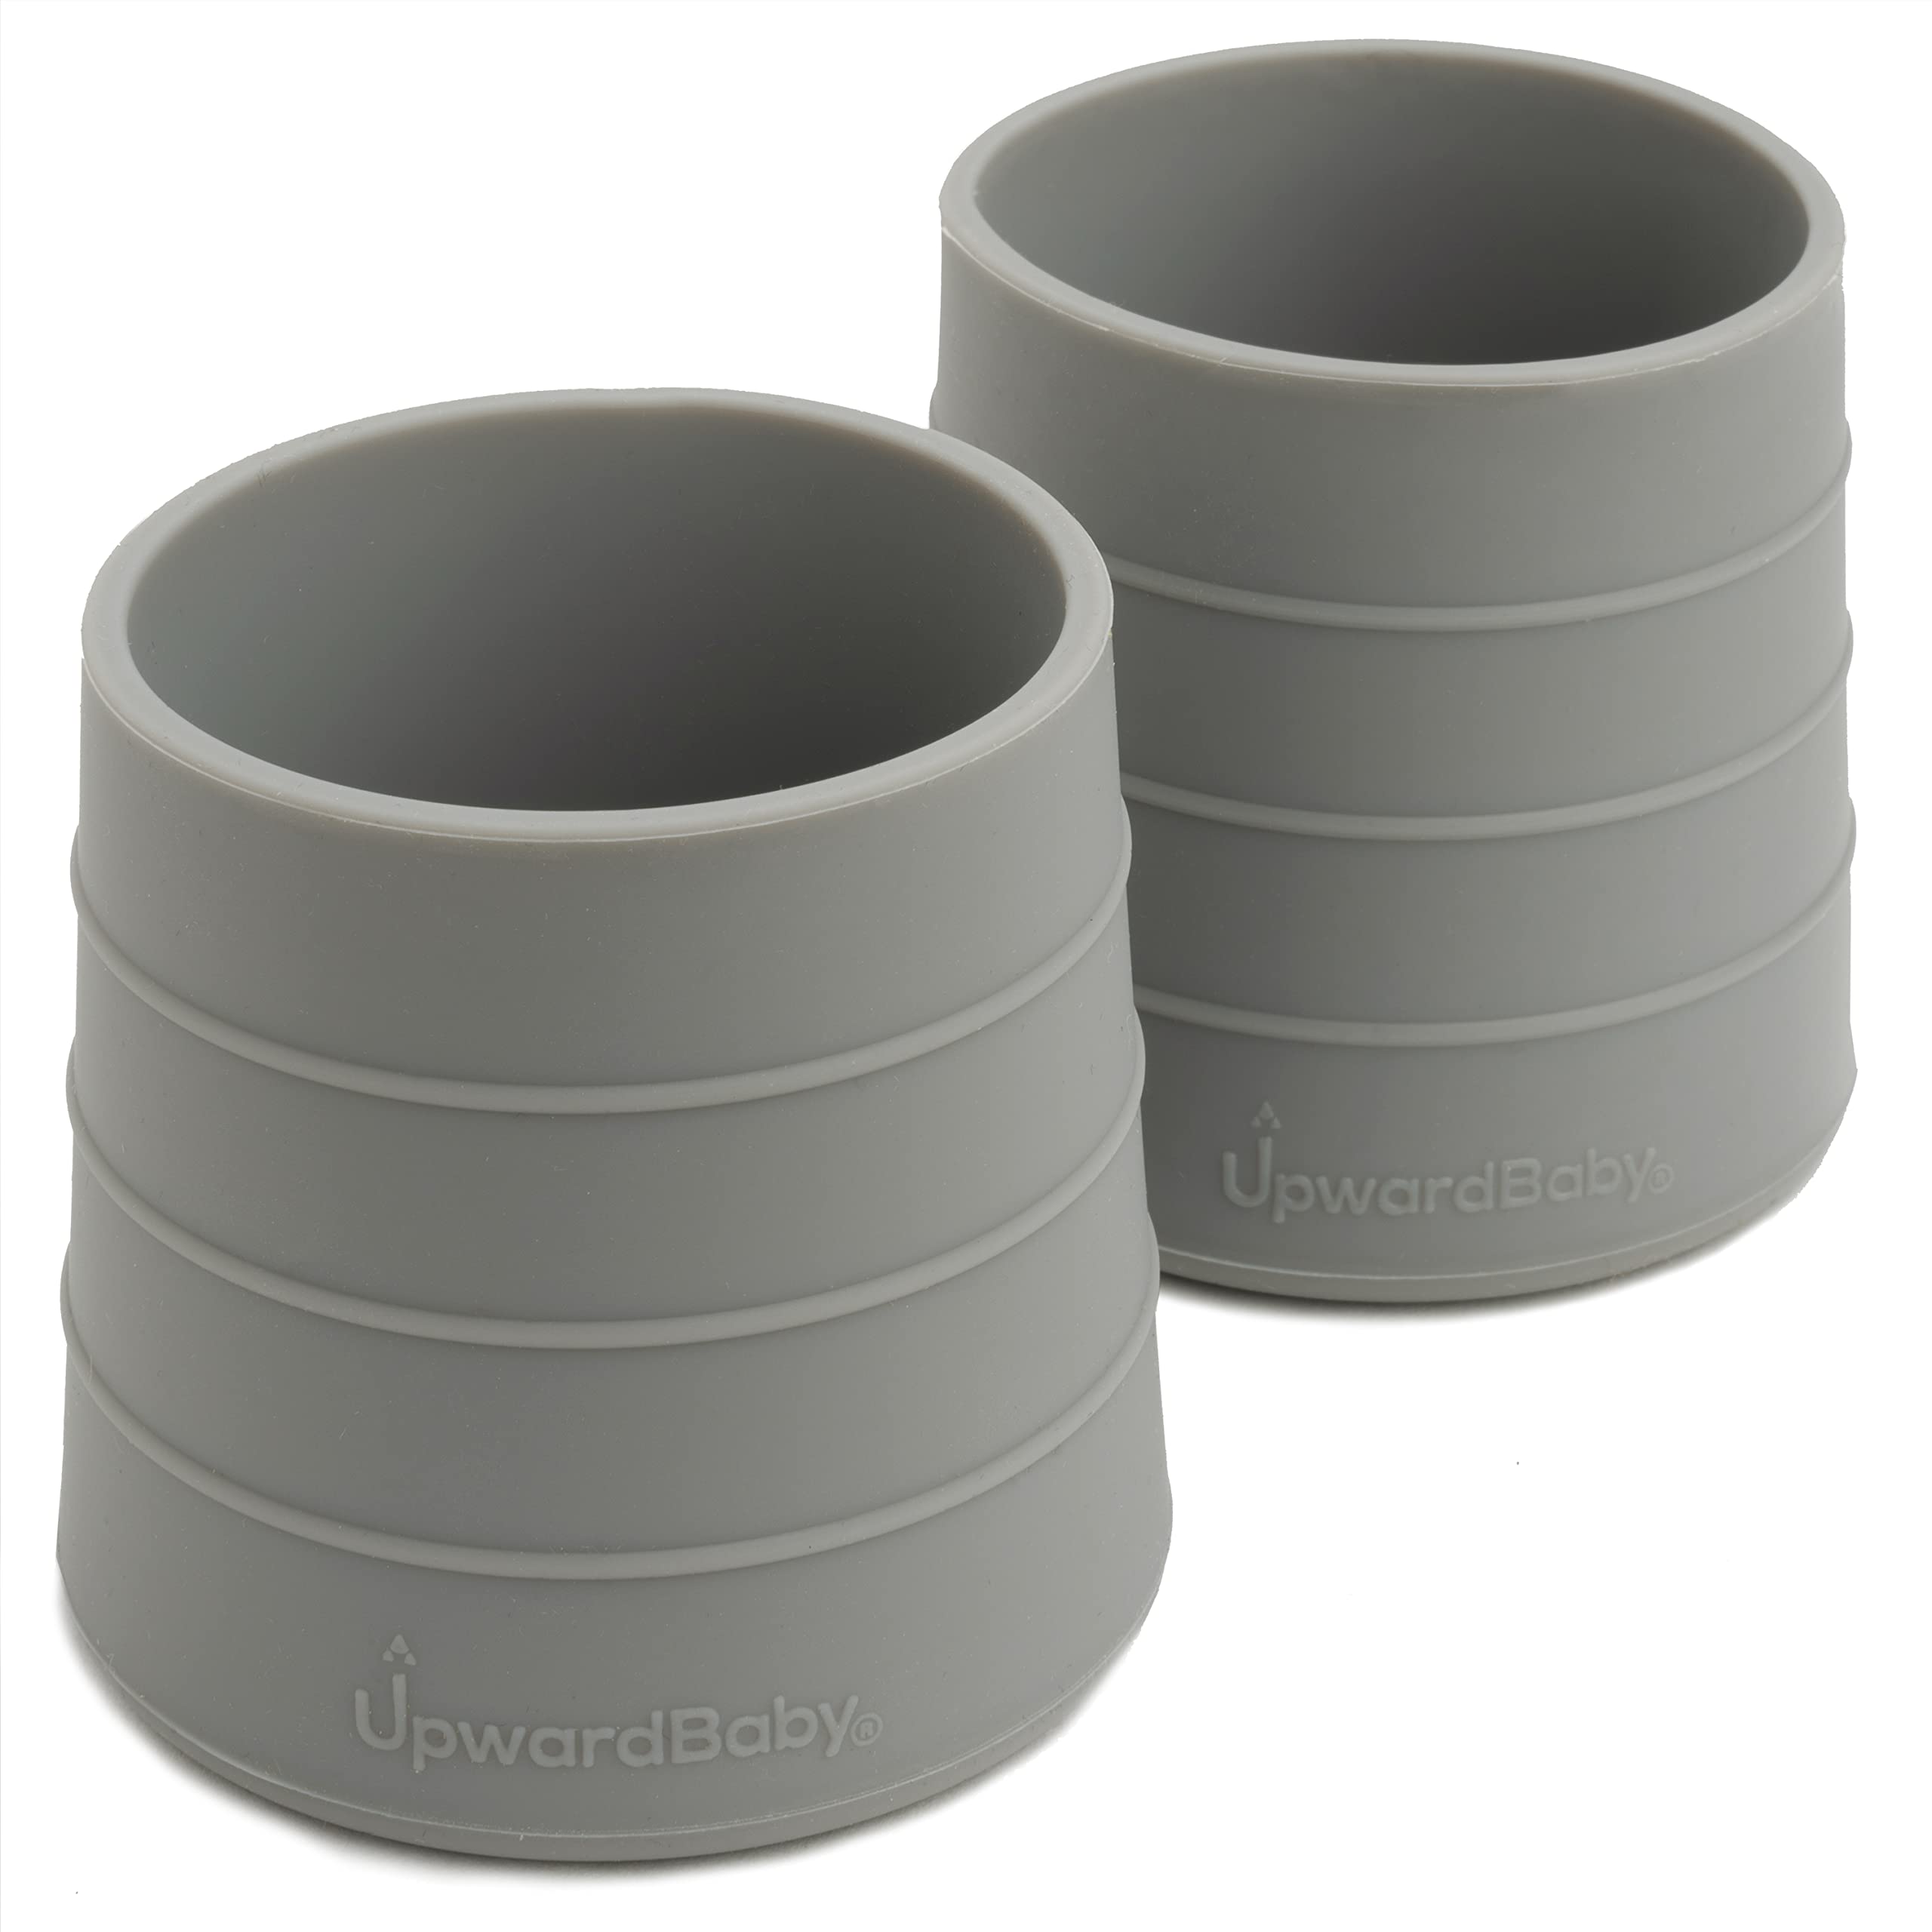 UpwardBaby Silicone Cups 2 pc Set - Transition Baby Open Cup from